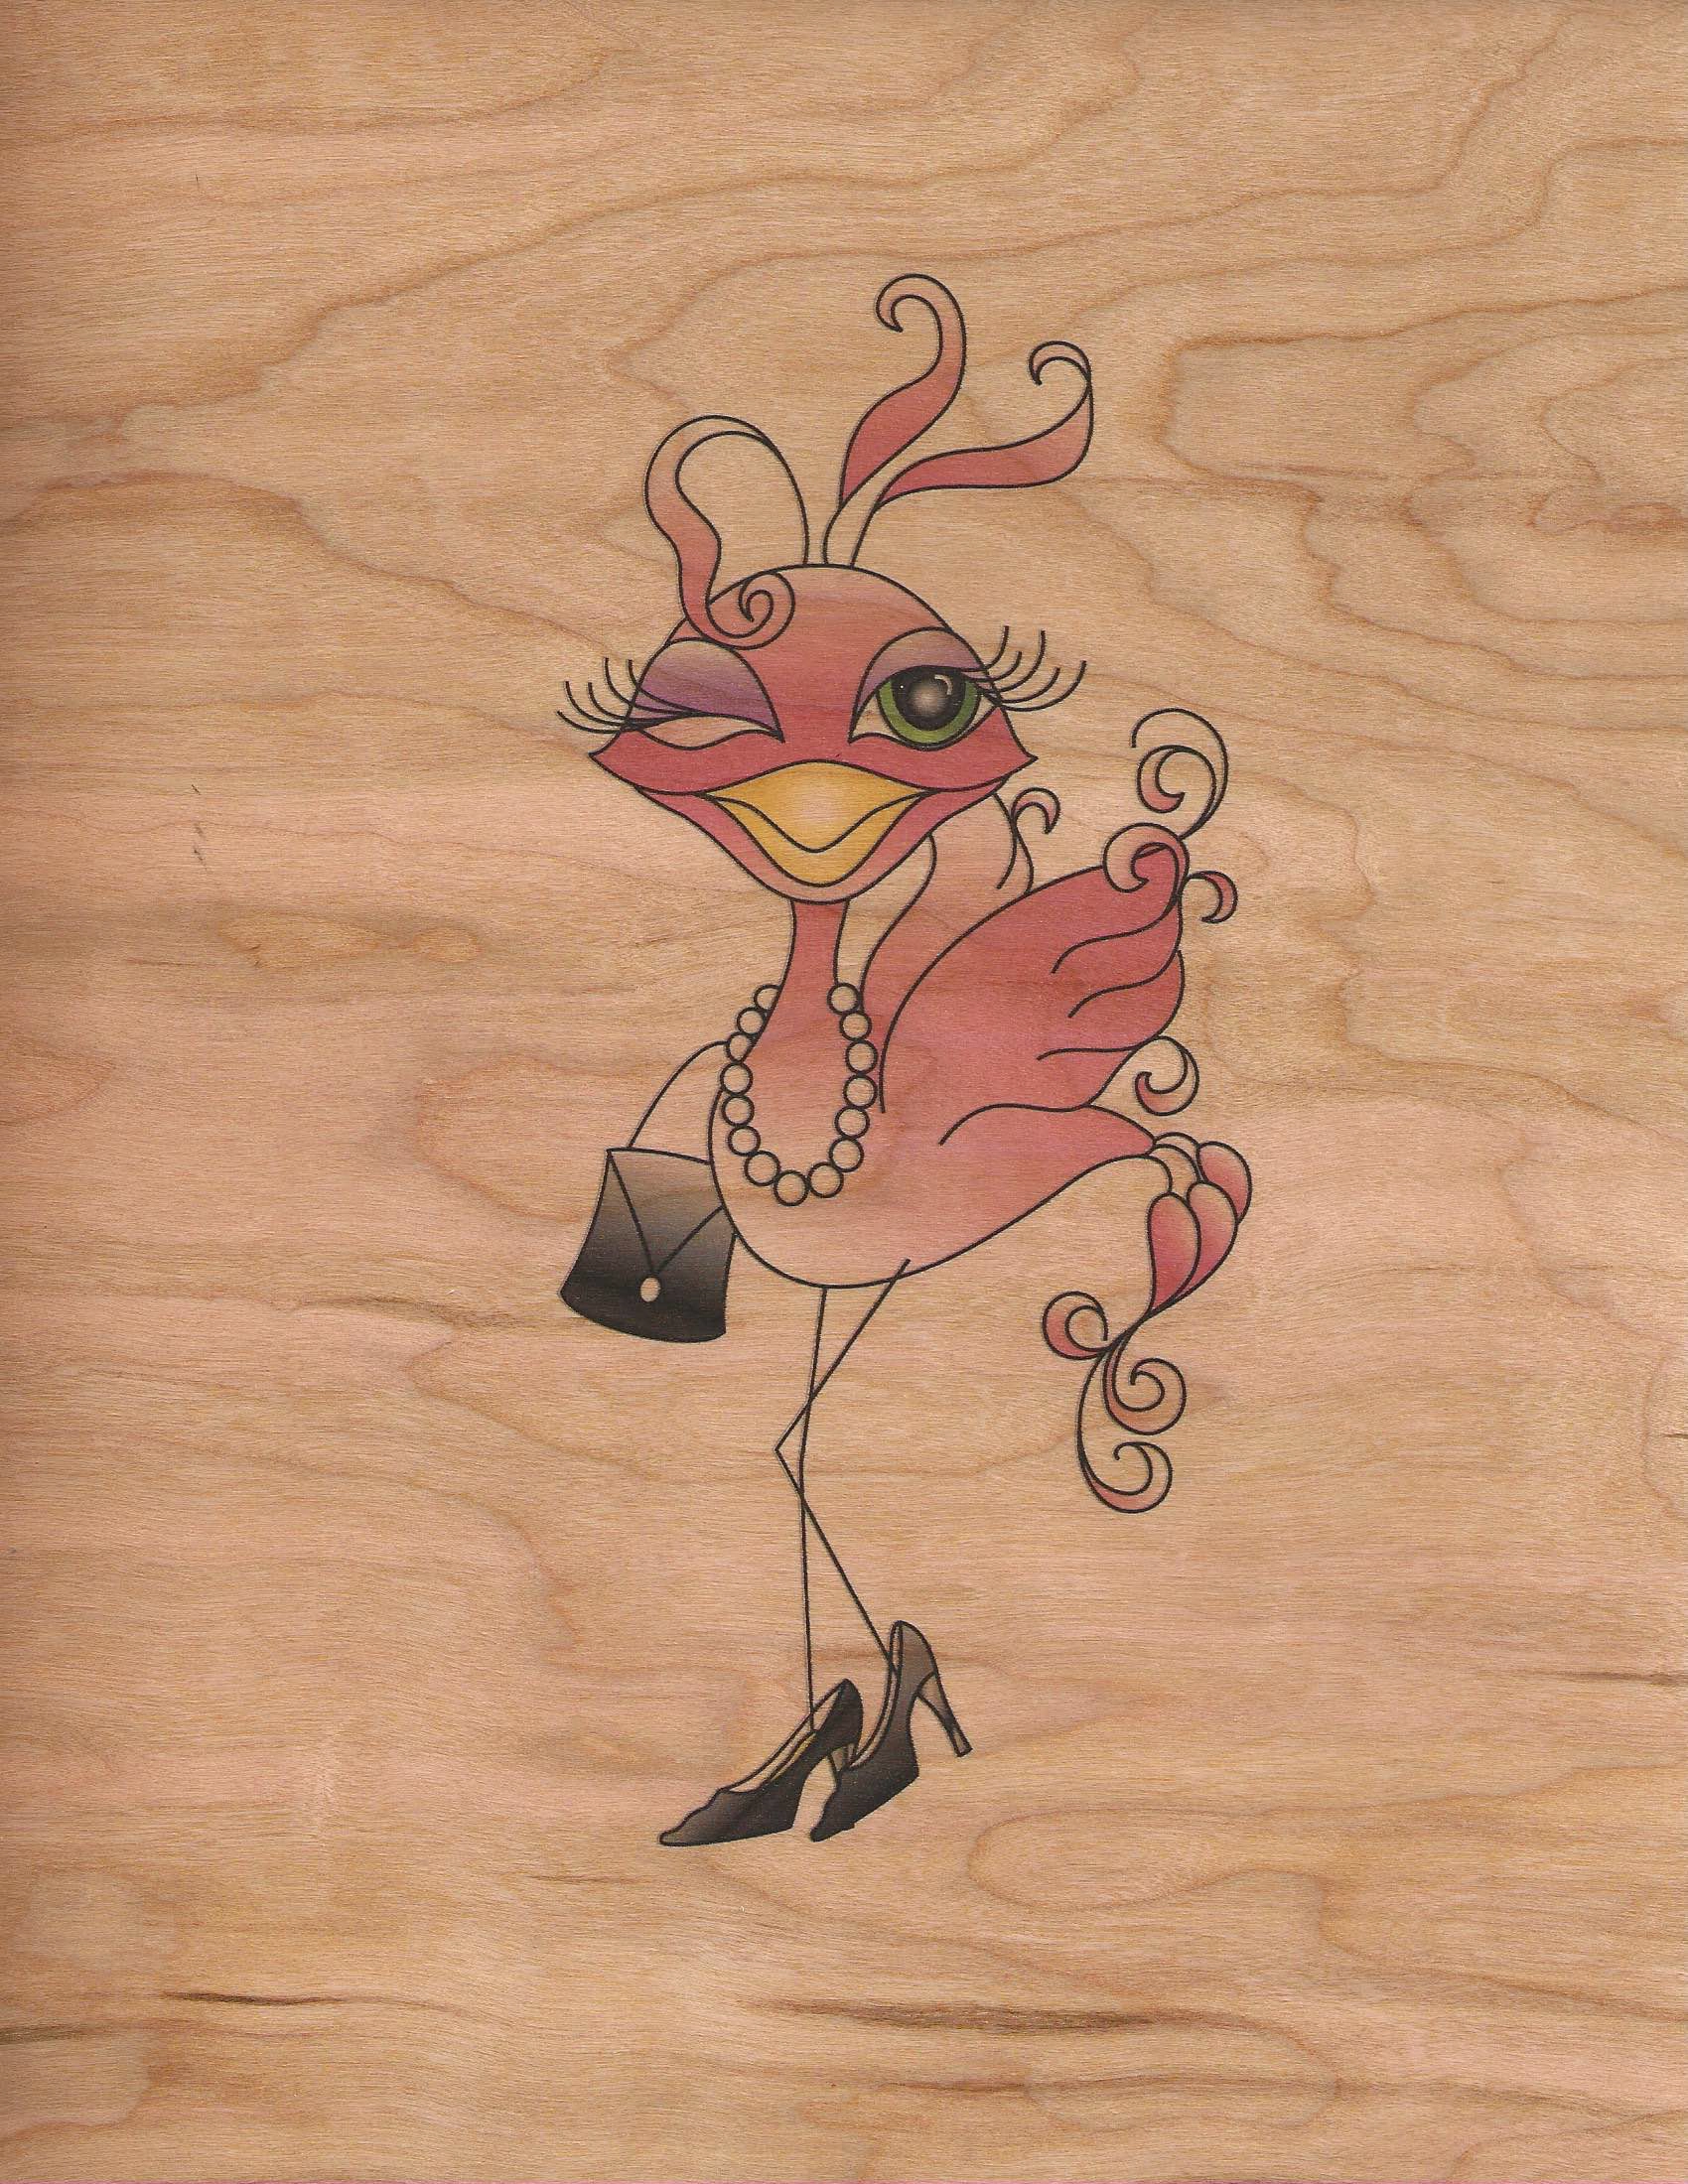 Printing on Wood with Inkjet Cherry Color